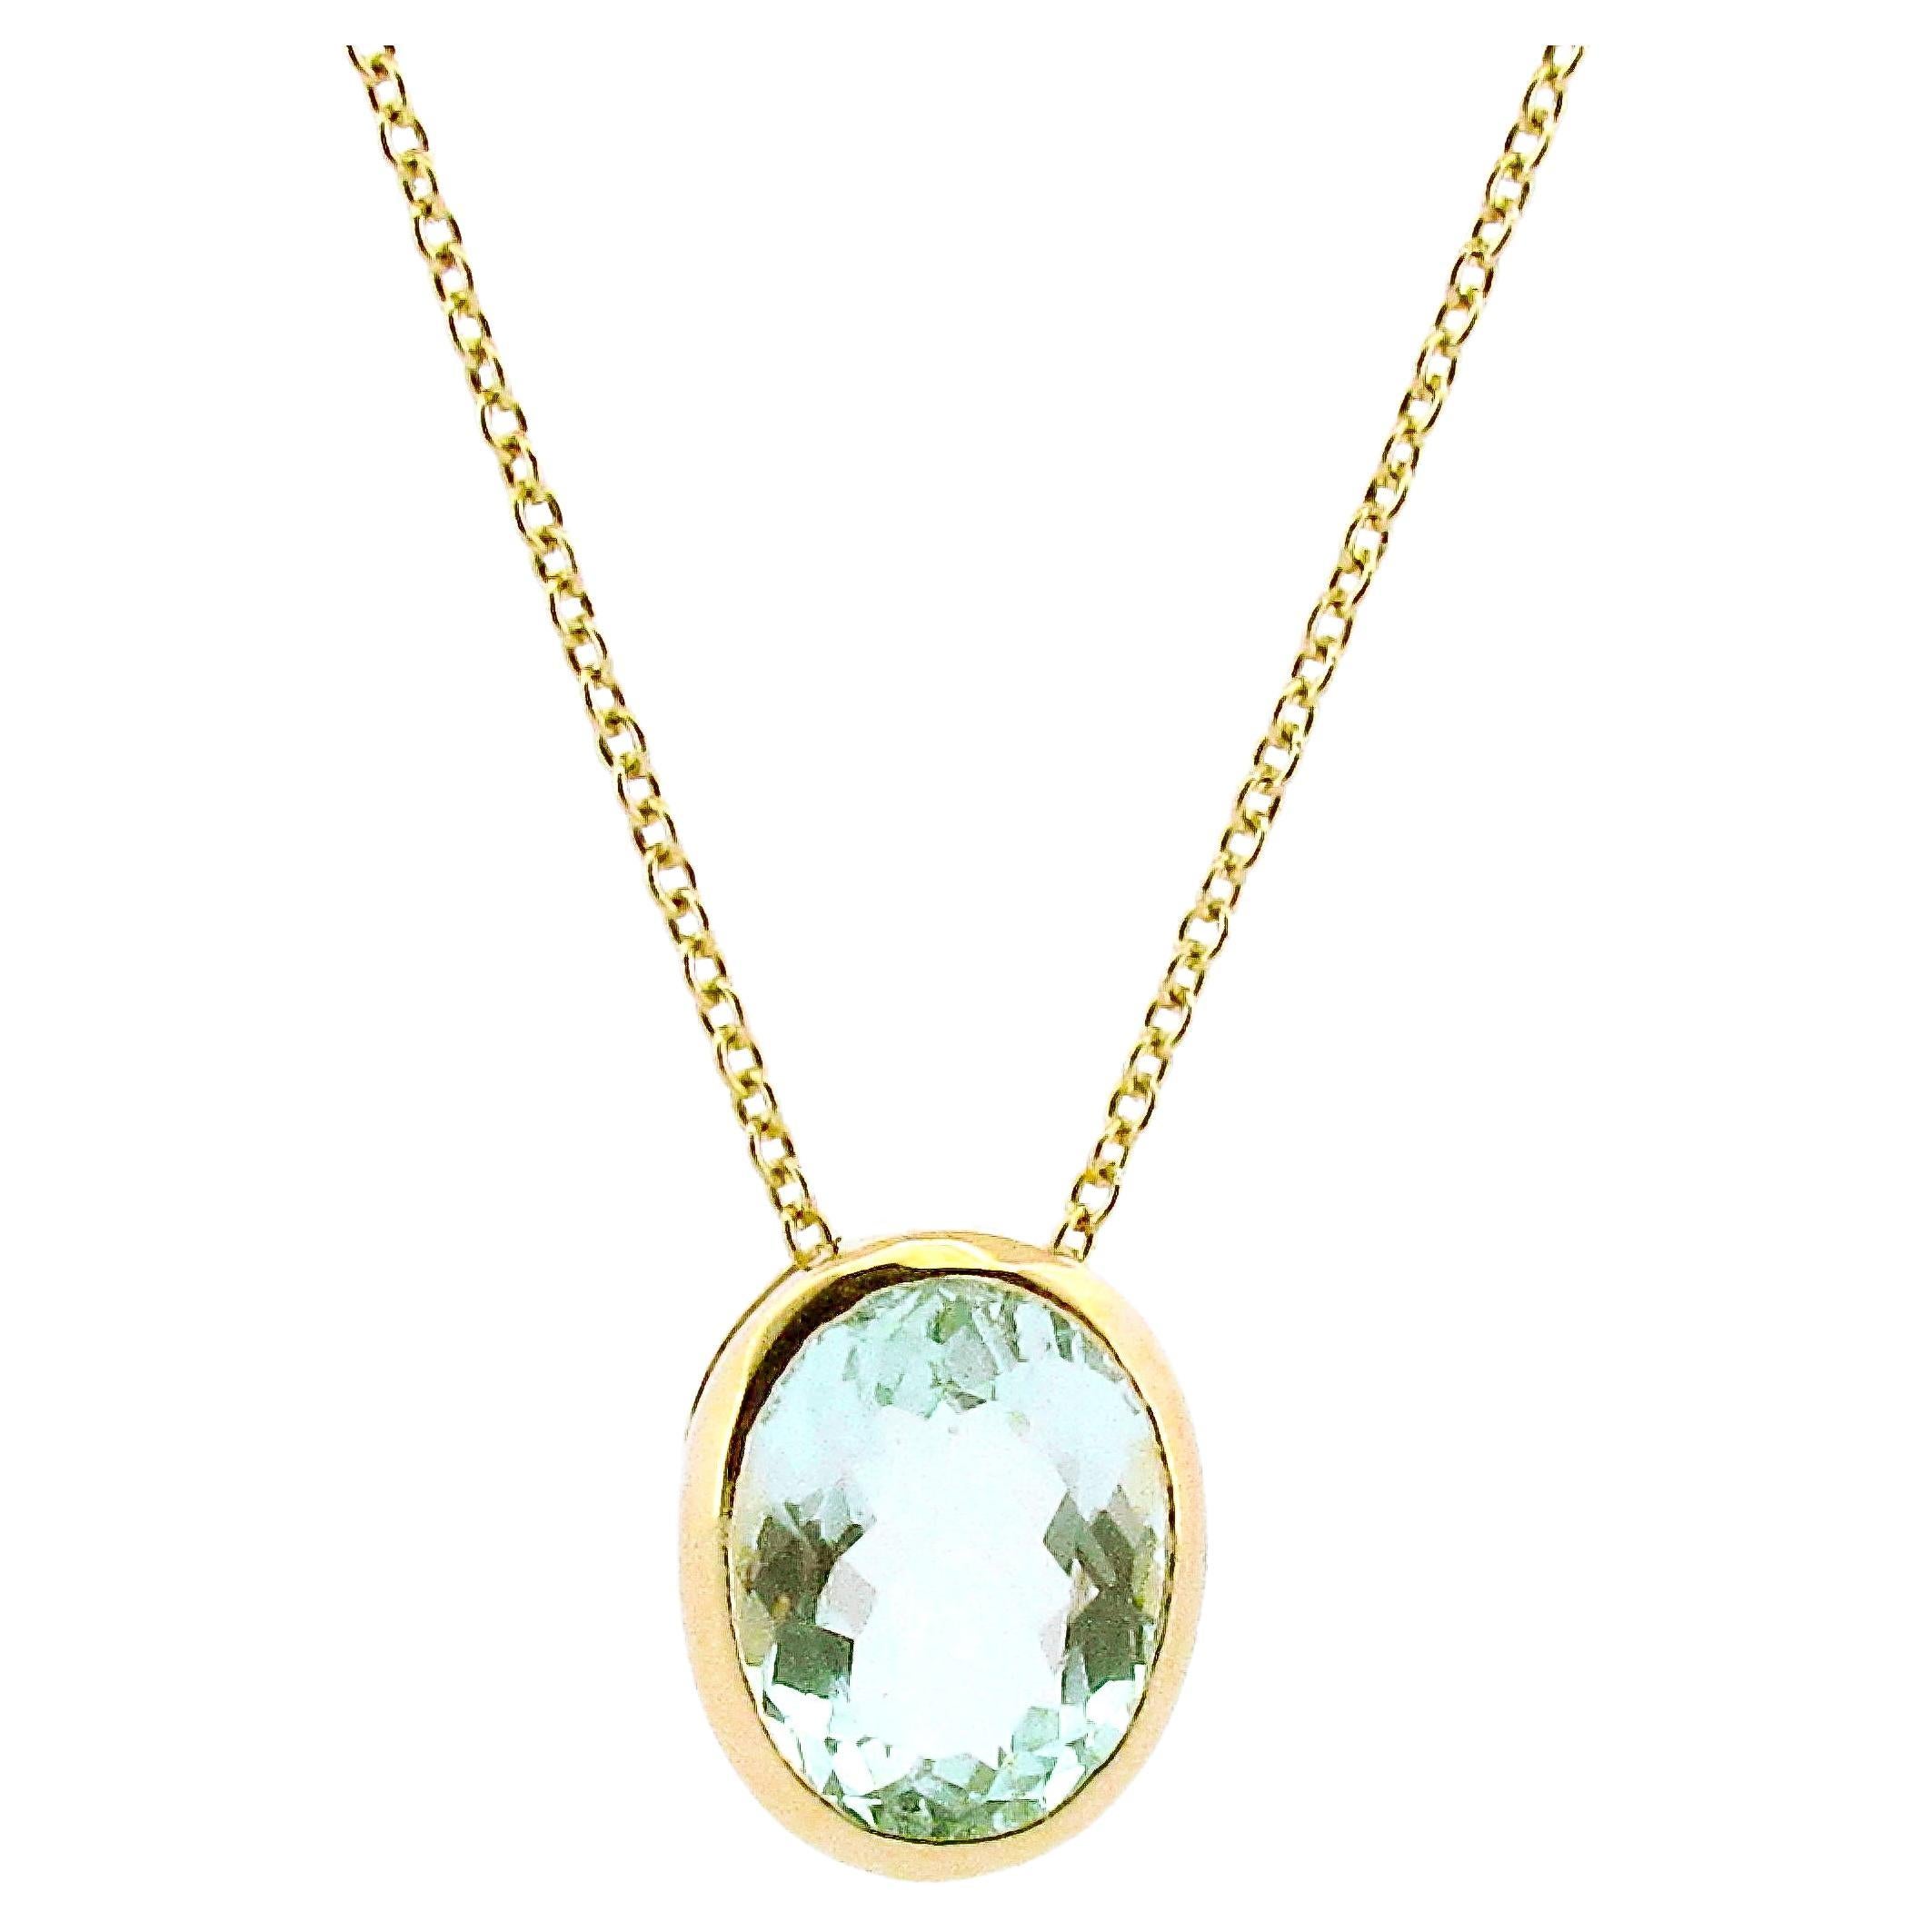 This 9ct solid Gold Sliding pendant is set with a beautiful 2.05ct bright blue faceted clear Aquamarine, this is a one of a kind pendant  different length chain,  it slides beautifully on a solid 9ct yellow gold 40cm/16inch delicate cable chain.  